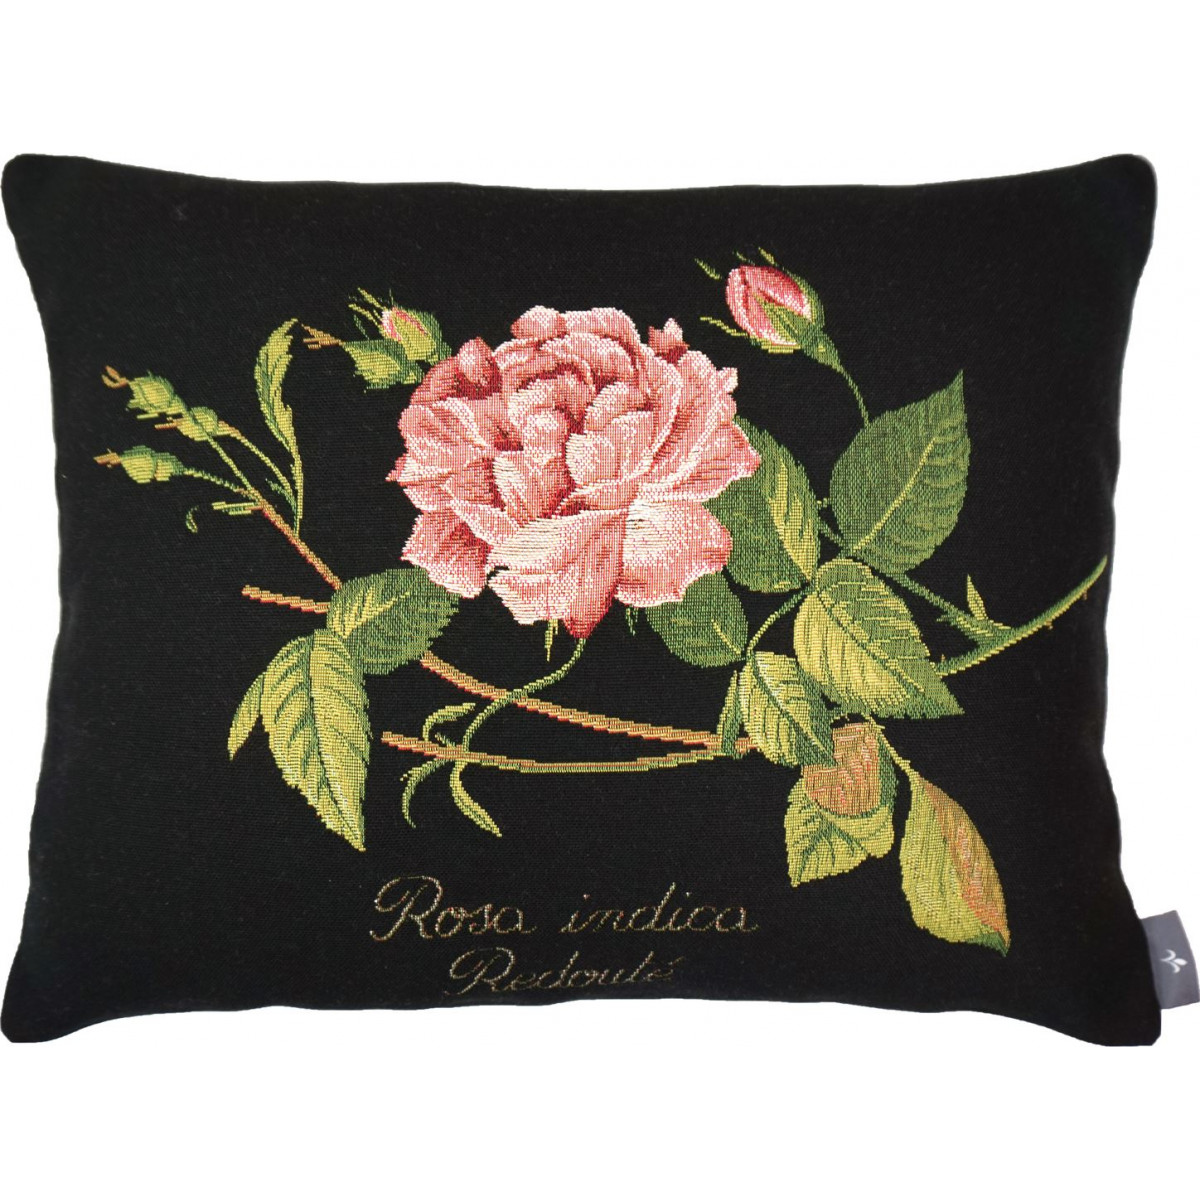 Coussin rectangulaire rosa indica made in france noir 38x48